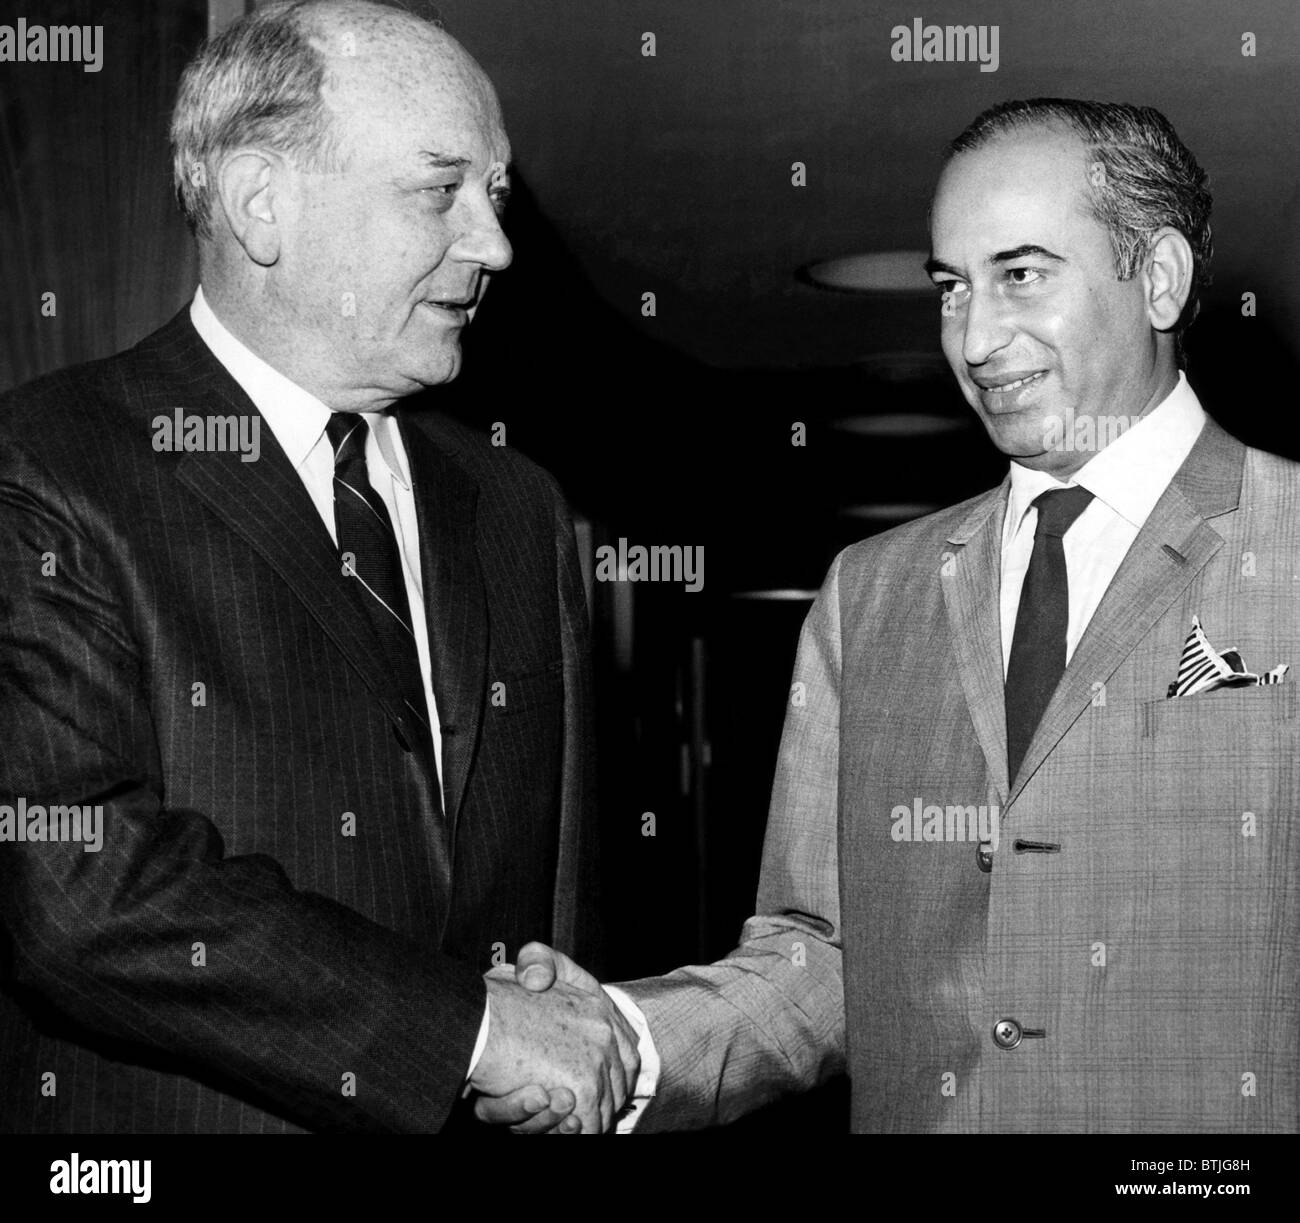 Secretary of State Dean Rusk welcomes Pakistani Foreign Minister Zulfikar Ali Bhutto to the U.N. headquarters in New York, 1965. Stock Photo